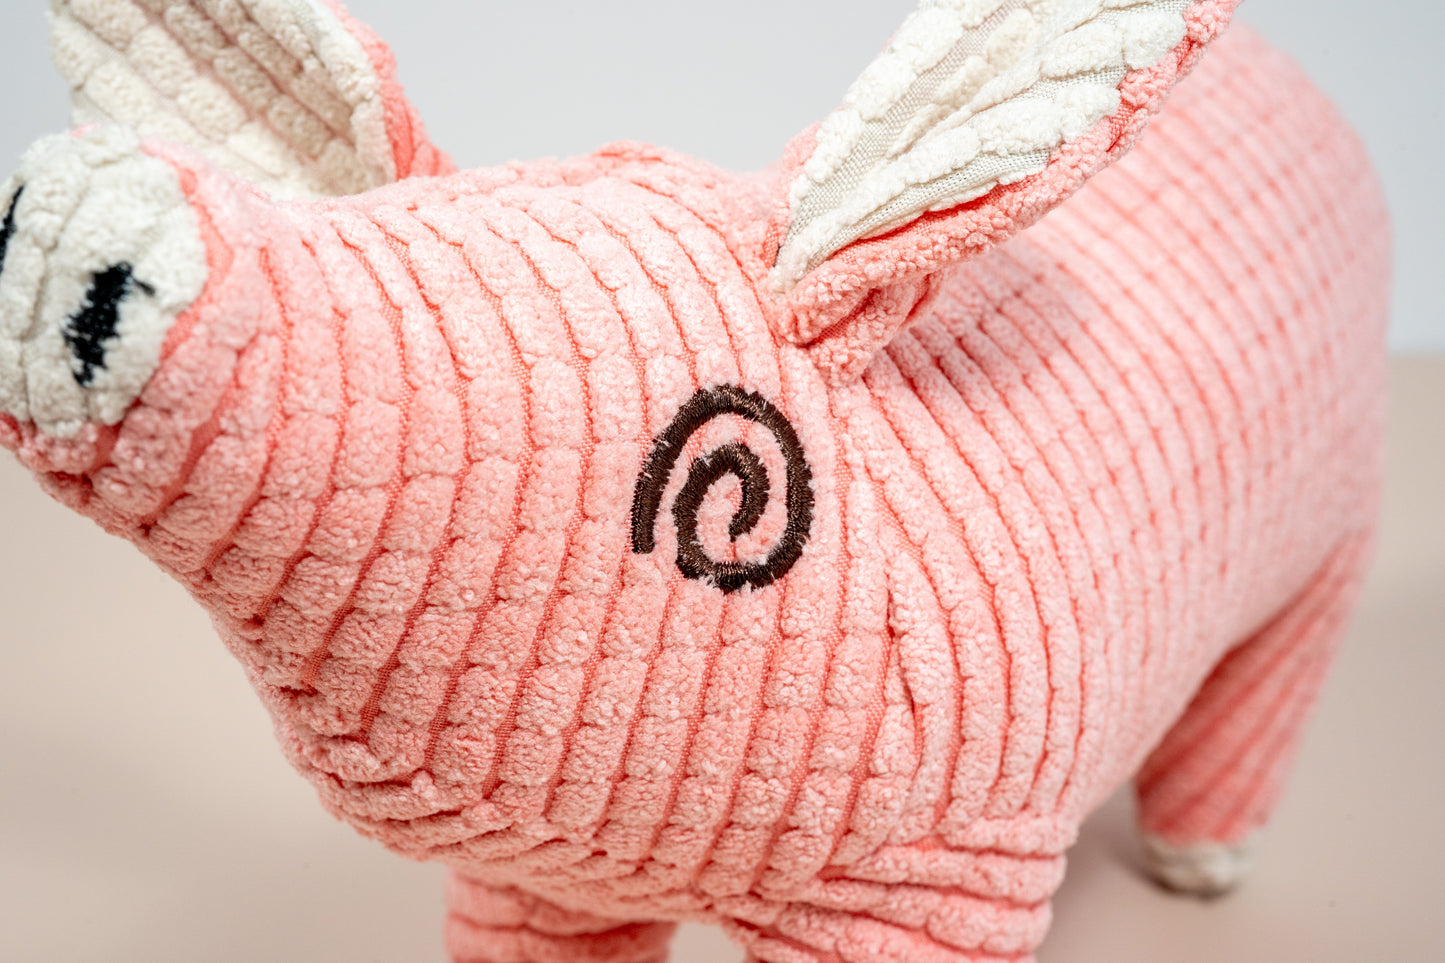 Close-up view of pink pig plush dog toy.